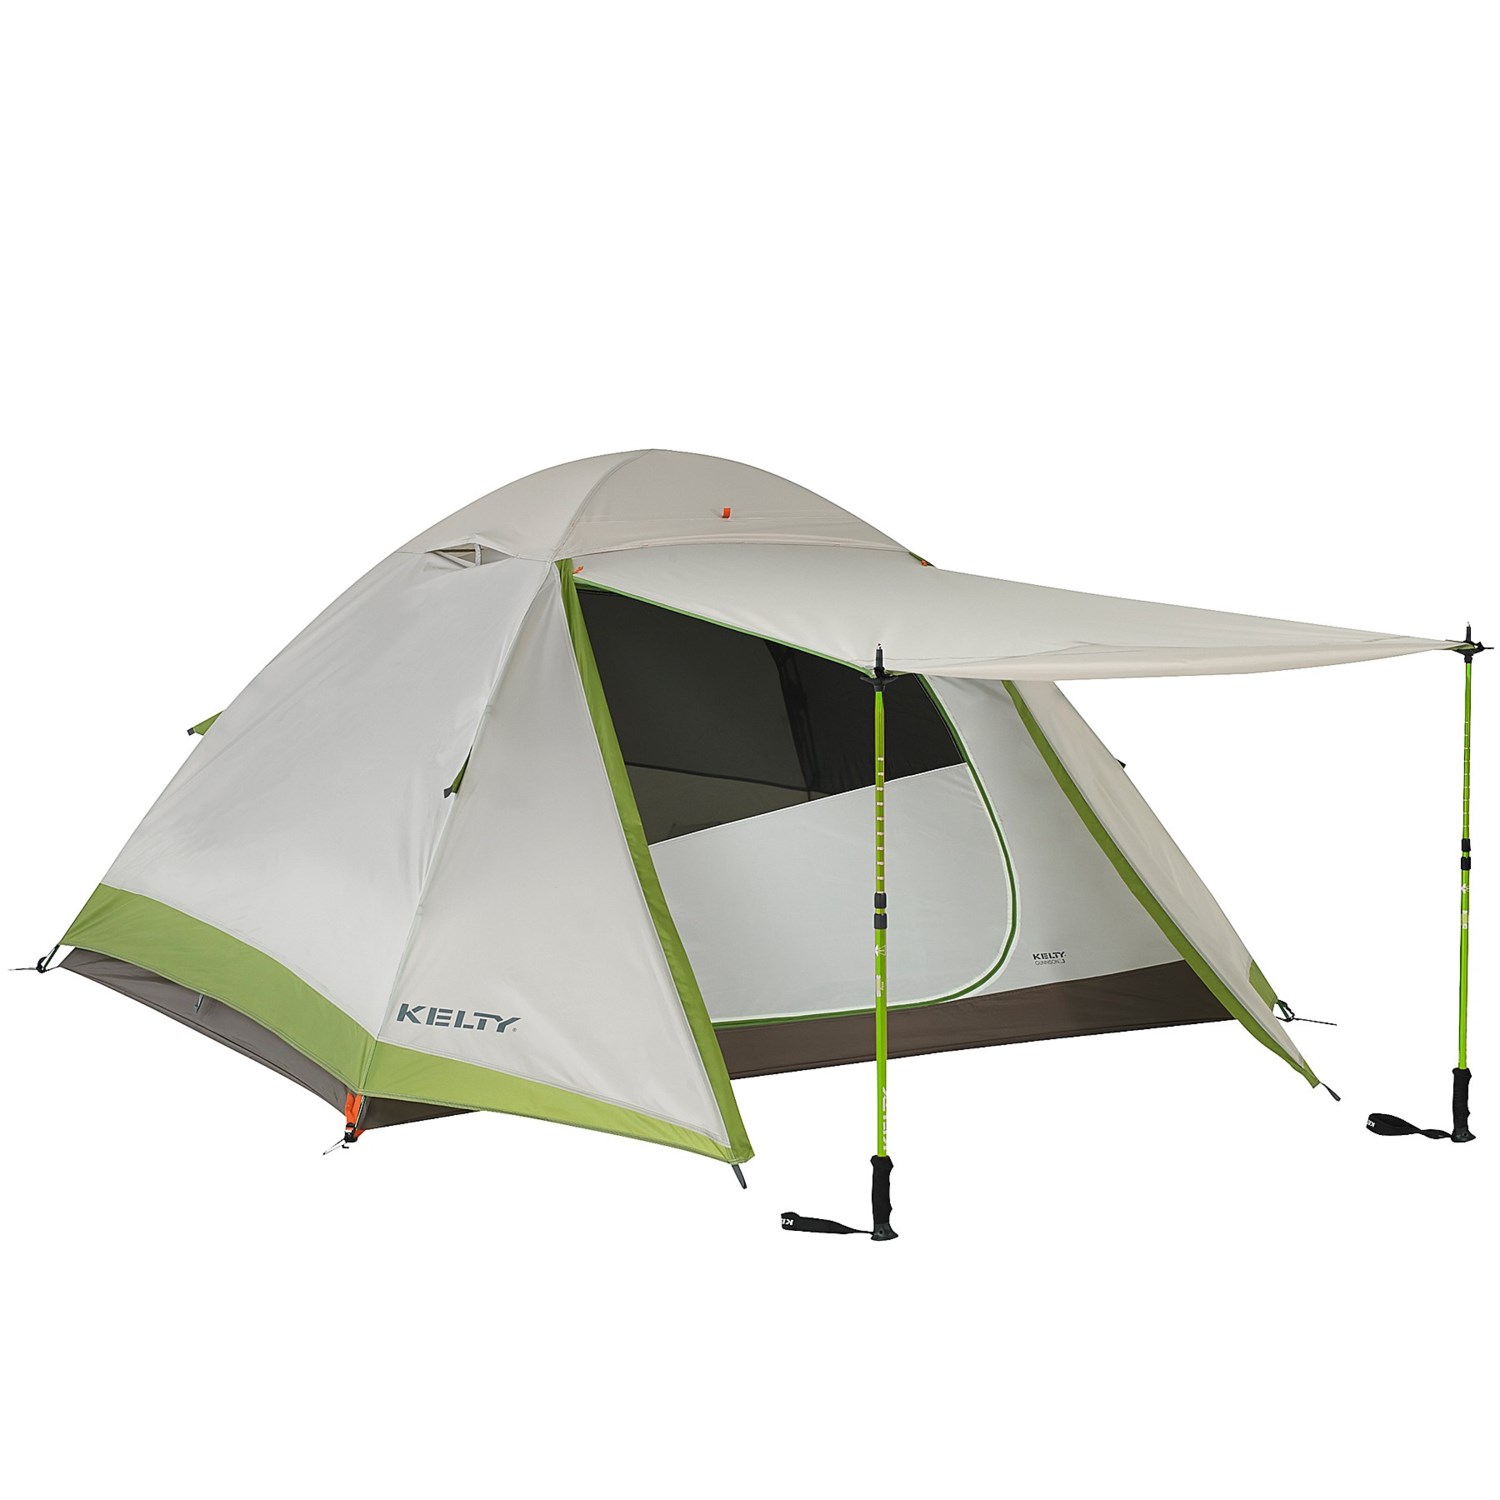 $179.99 Kelty Gunnison 4.3 Tent With Footprint - 4-Person, 3-Season (vs. $289.95) at Sierra Trading Post